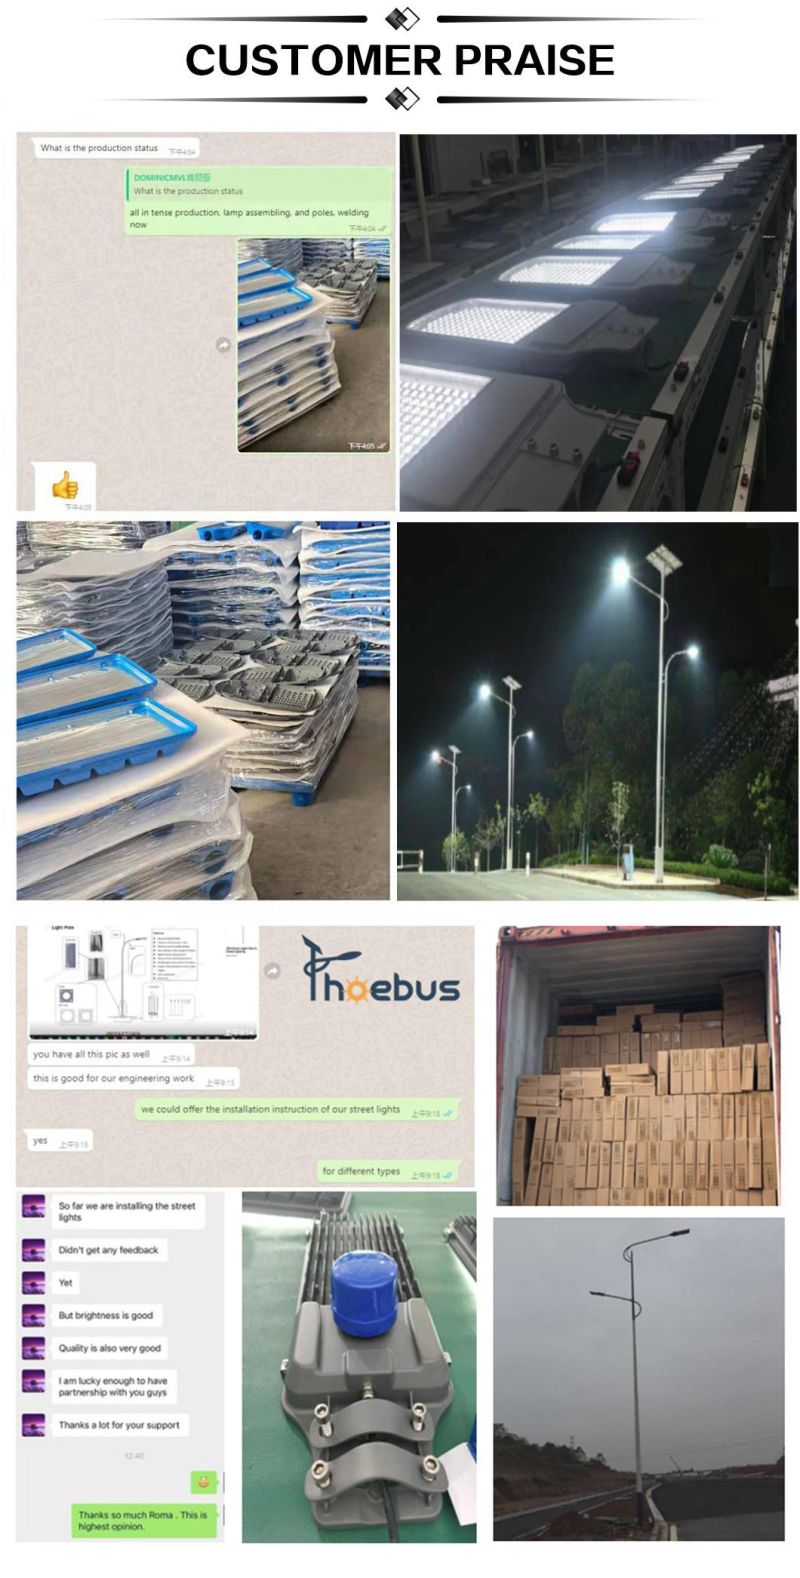 CE RoHS Super Bright LED Lamp Outdoor Cost-Effective LED Lighting 150W